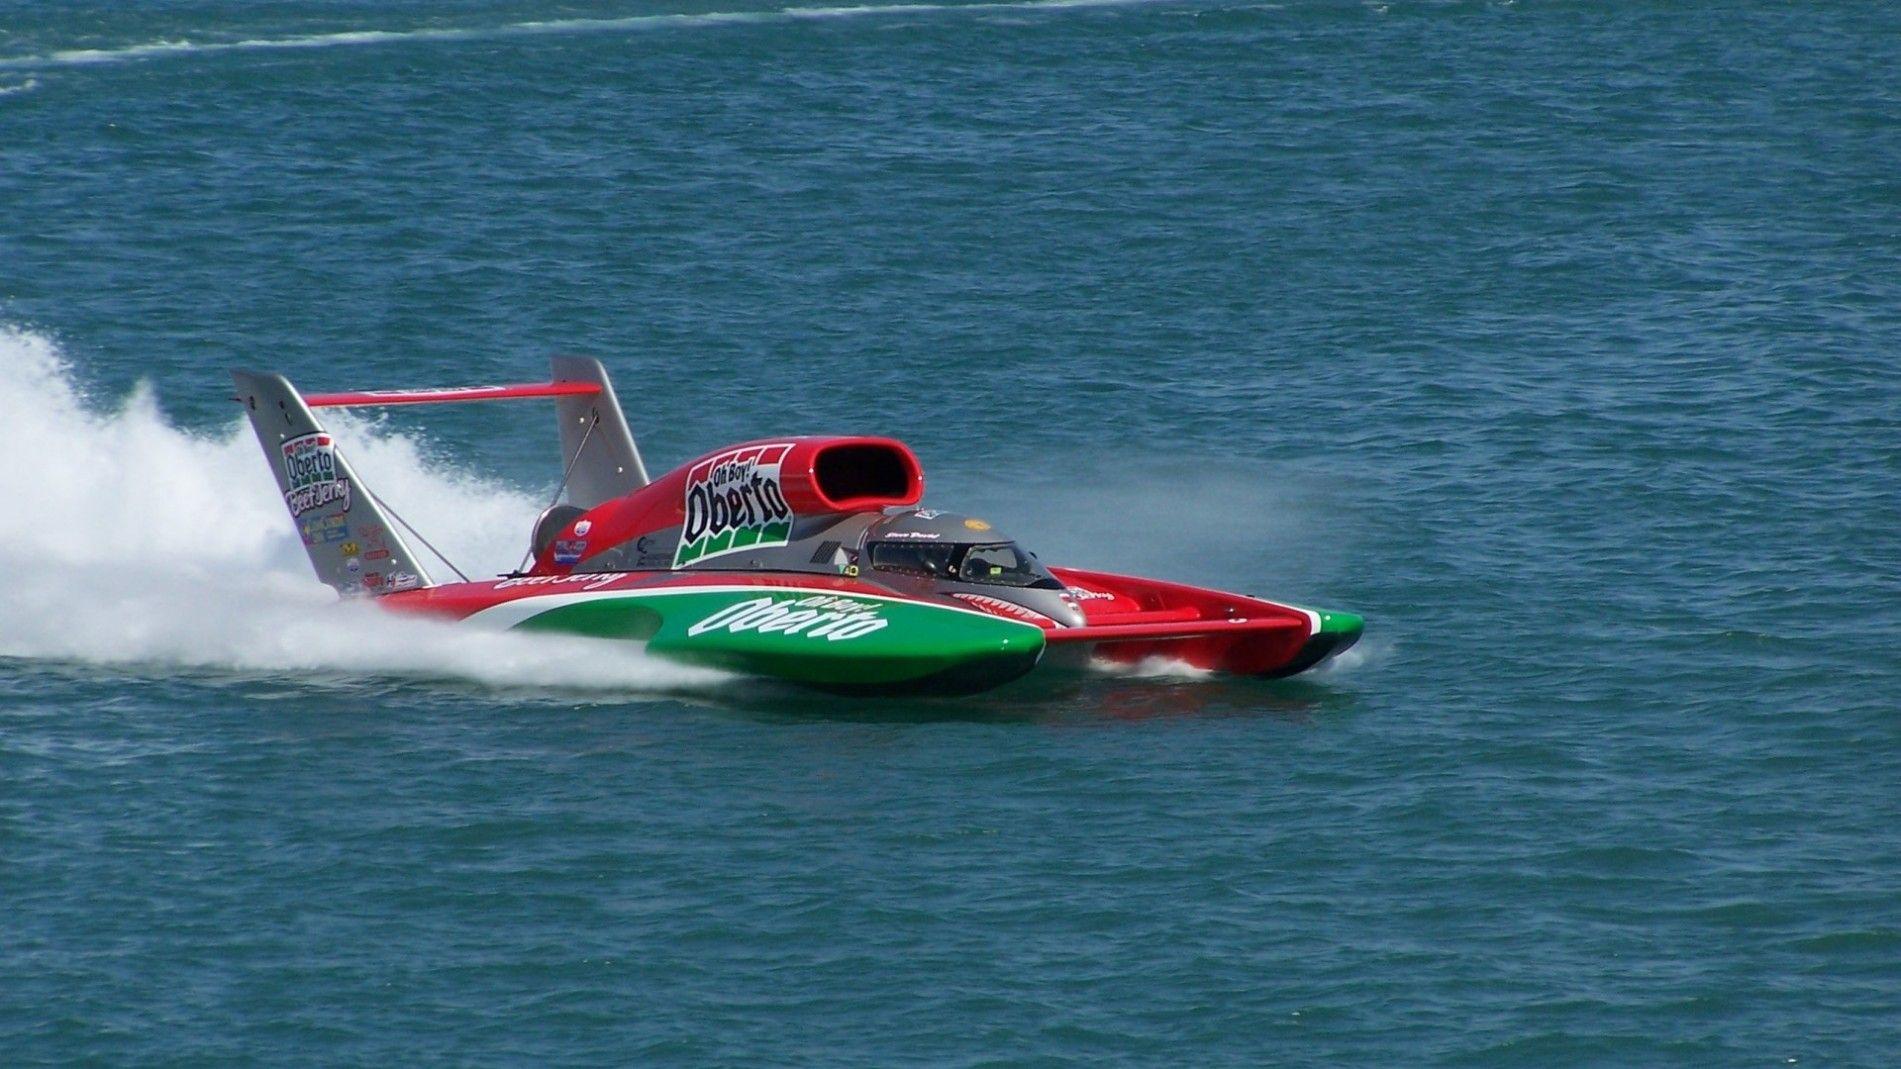 Racing high speed boat real high definition wallpaper. High